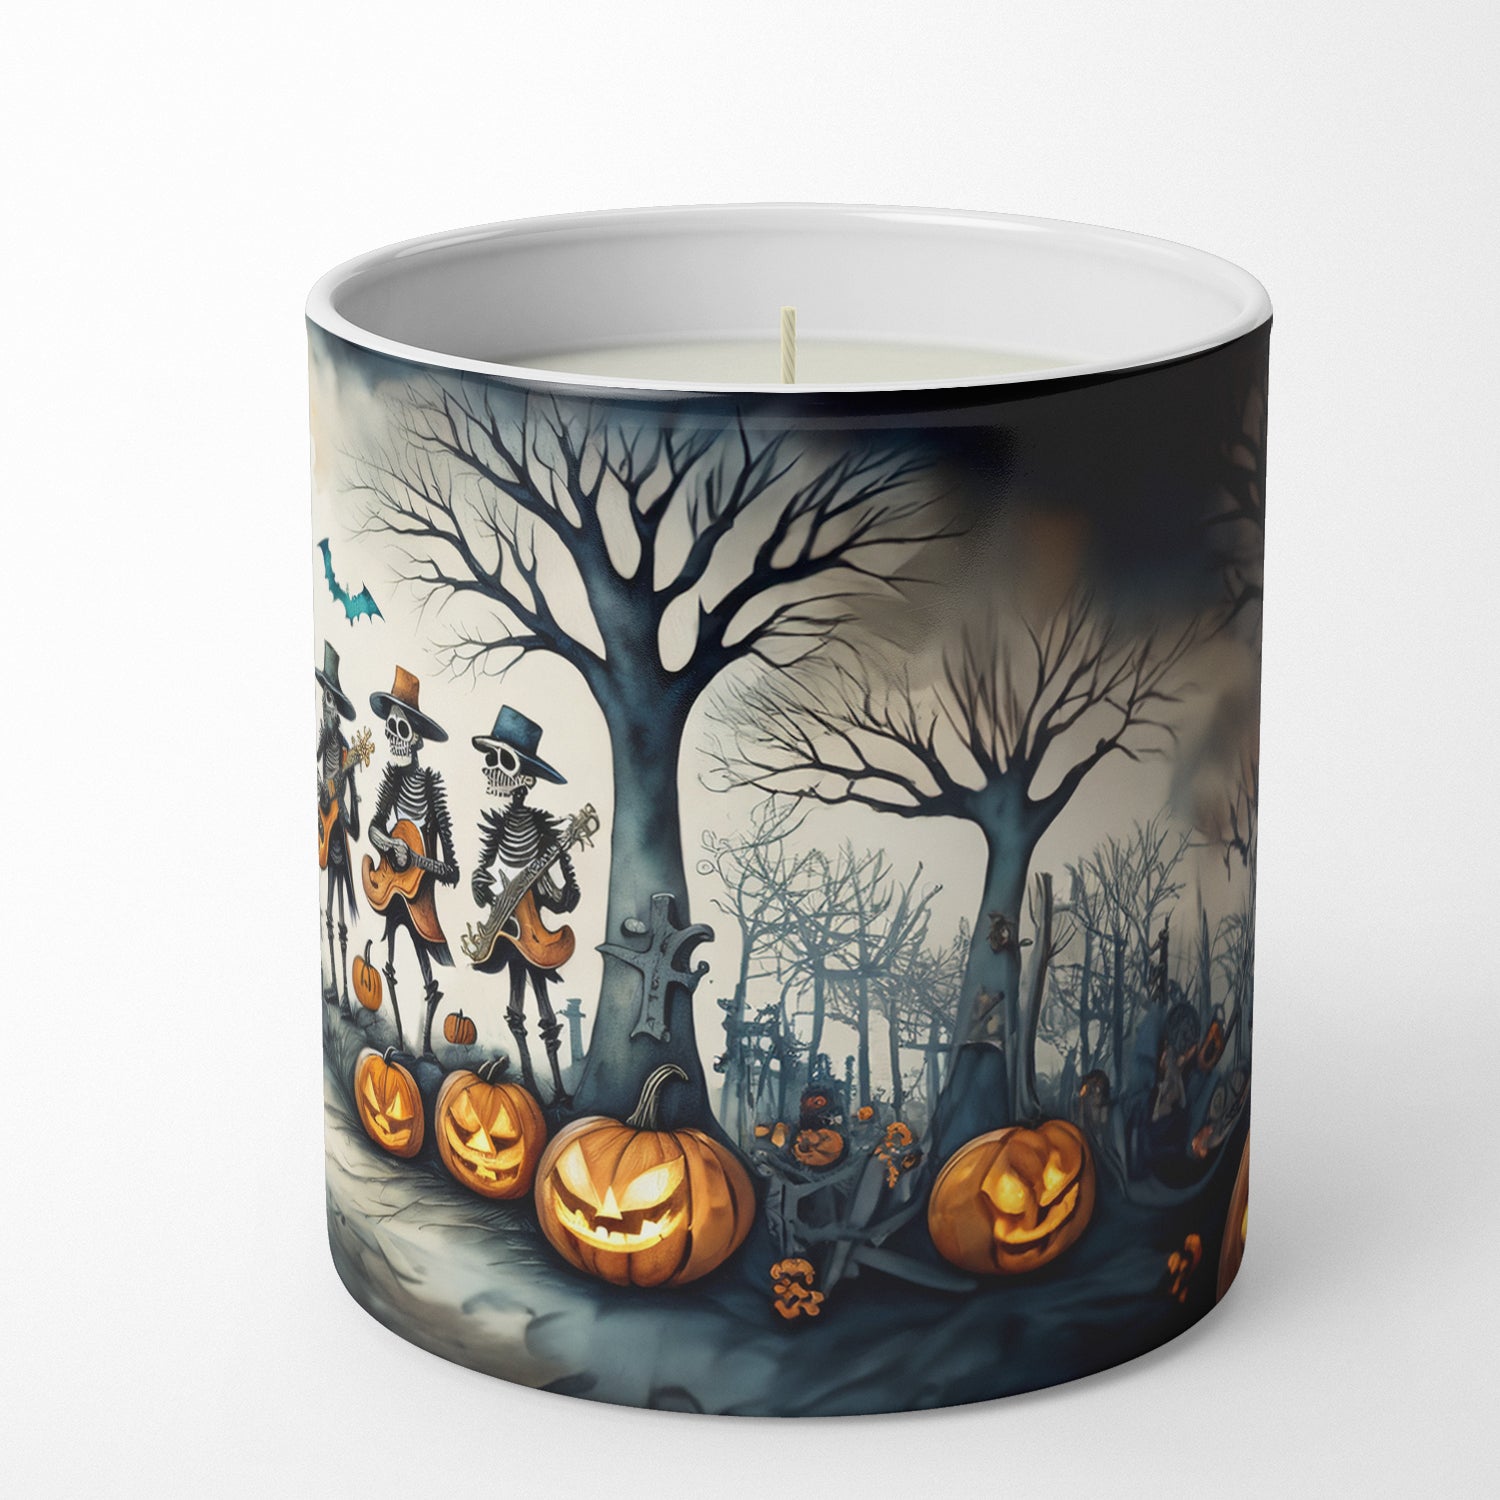 Mariachi Skeleton Band Spooky Halloween Decorative Soy Candle